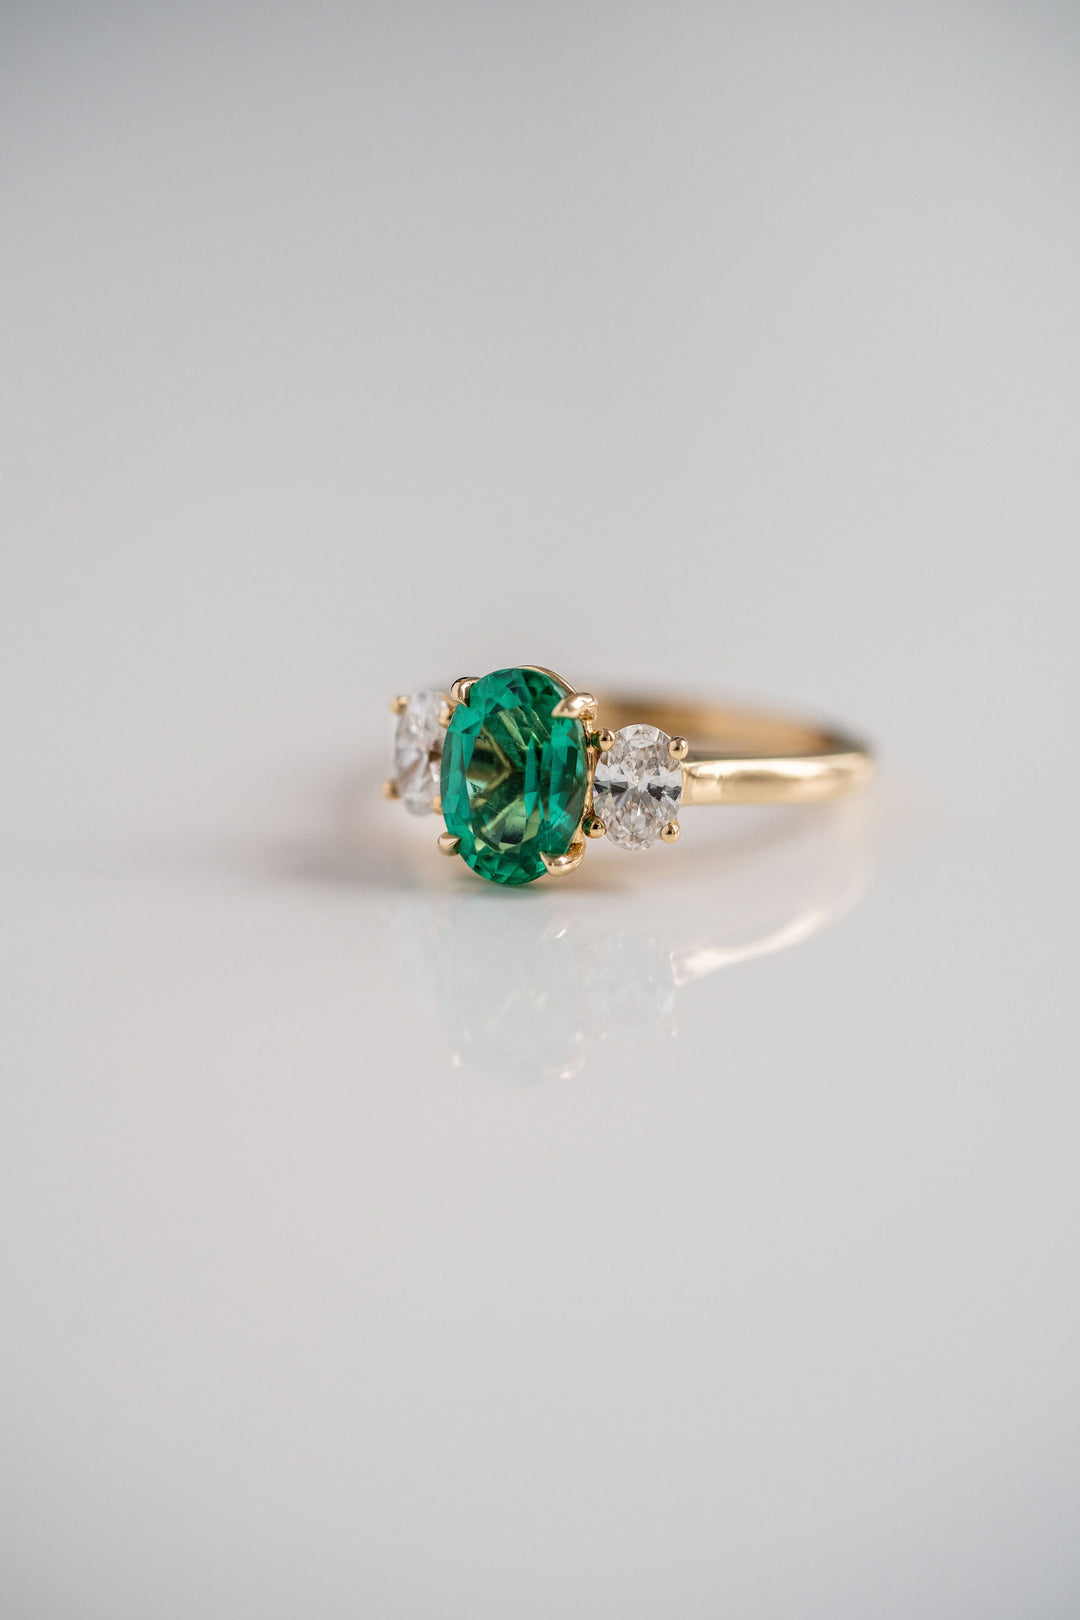 1.77ct. Oval Zambian Emerald With Oval Diamond Accents, 14k Yellow Gold